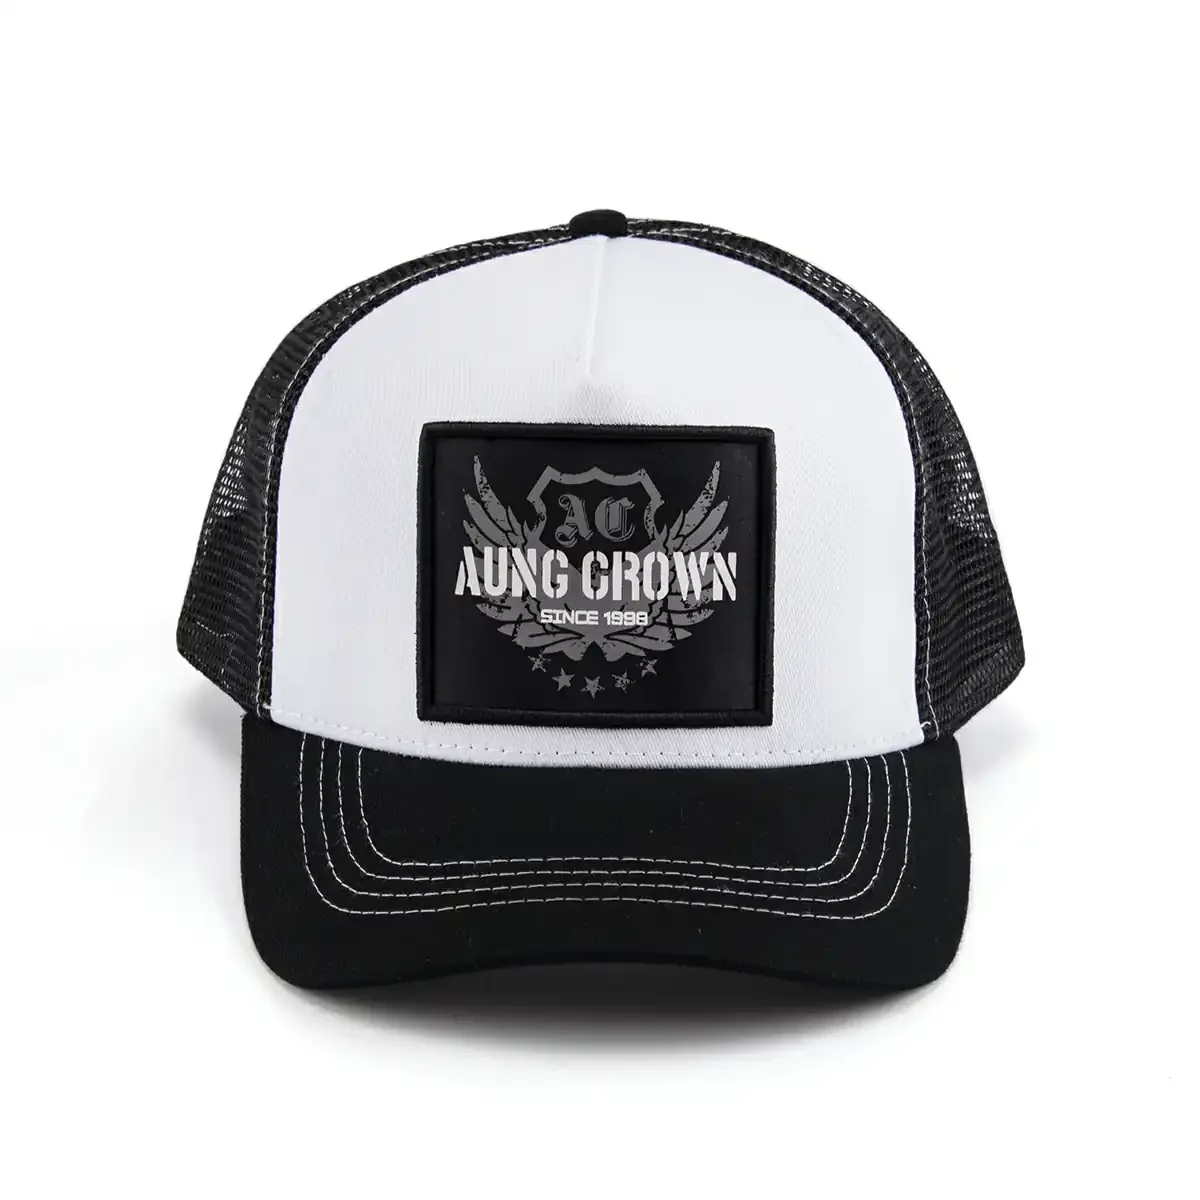 Aung-Crown-white-black-youth-trucker-hat-for-outdoors-SFA-210415-2